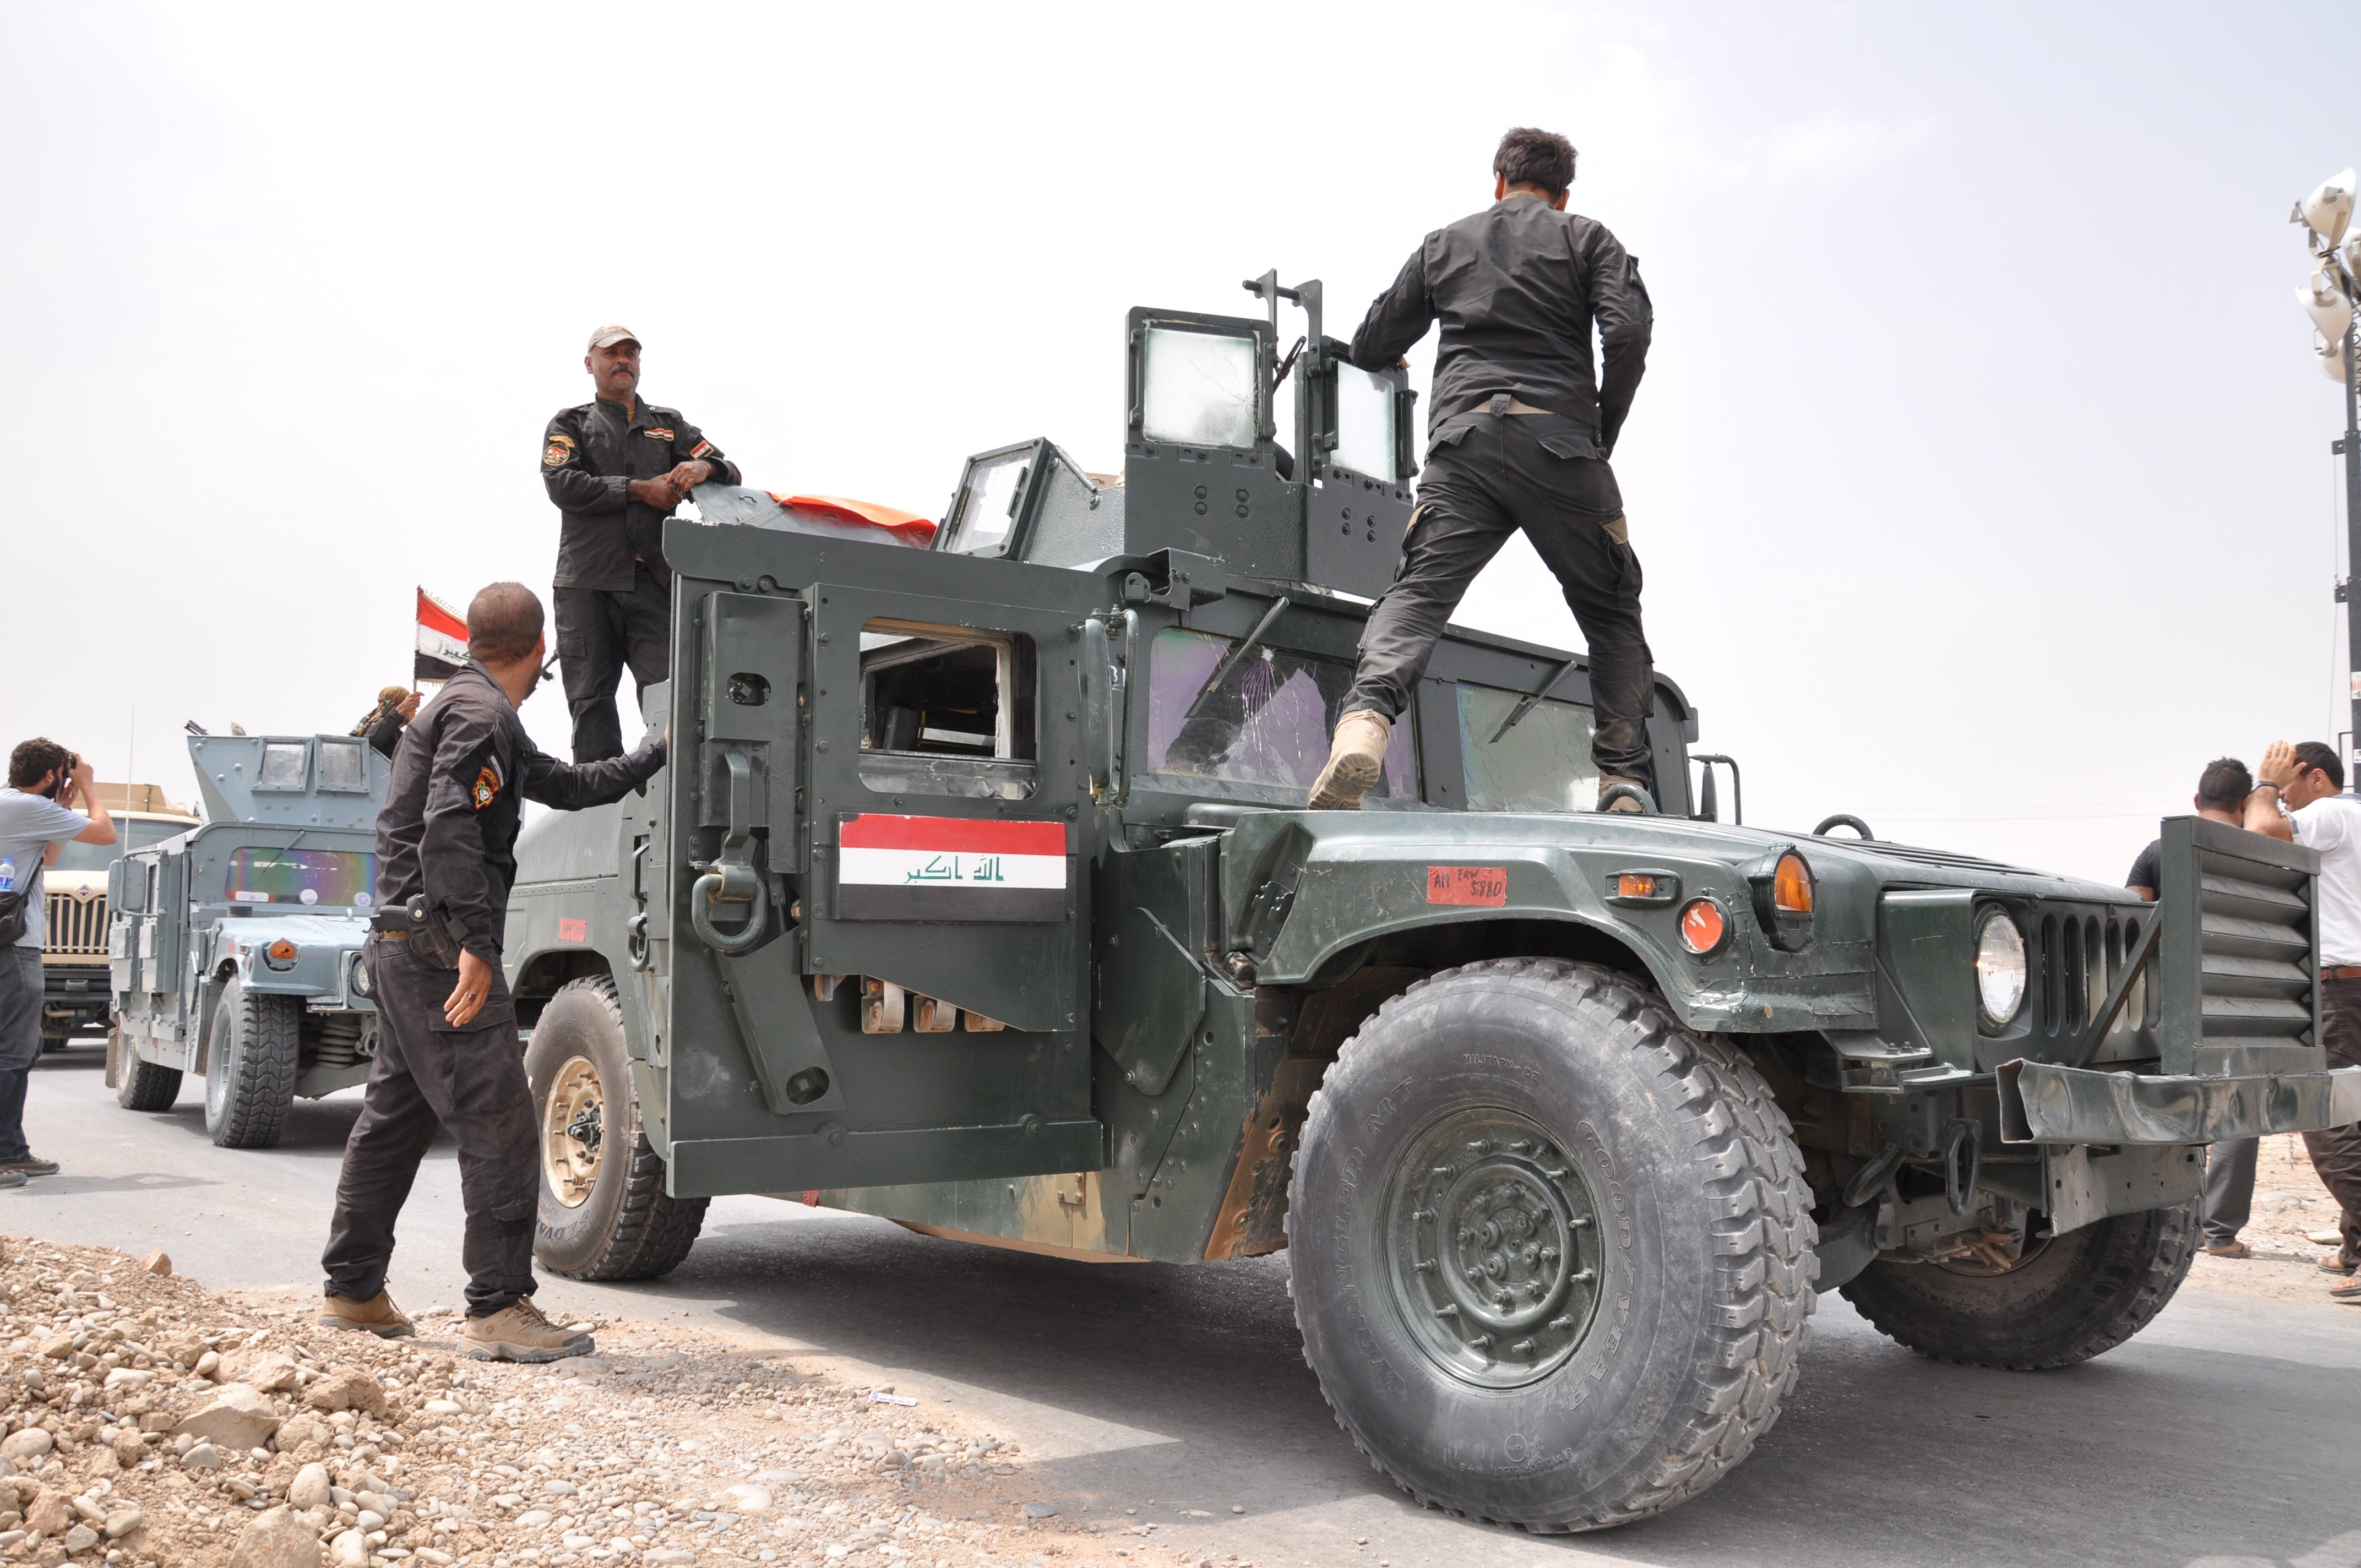 Iraqi army and Peshmerga forces take security precautions against possible ISIS-led attacks around the Mosul Dam on August 19, 2014 in Mosul, Iraq. (Anadolu Agency&mdash;Getty Images)